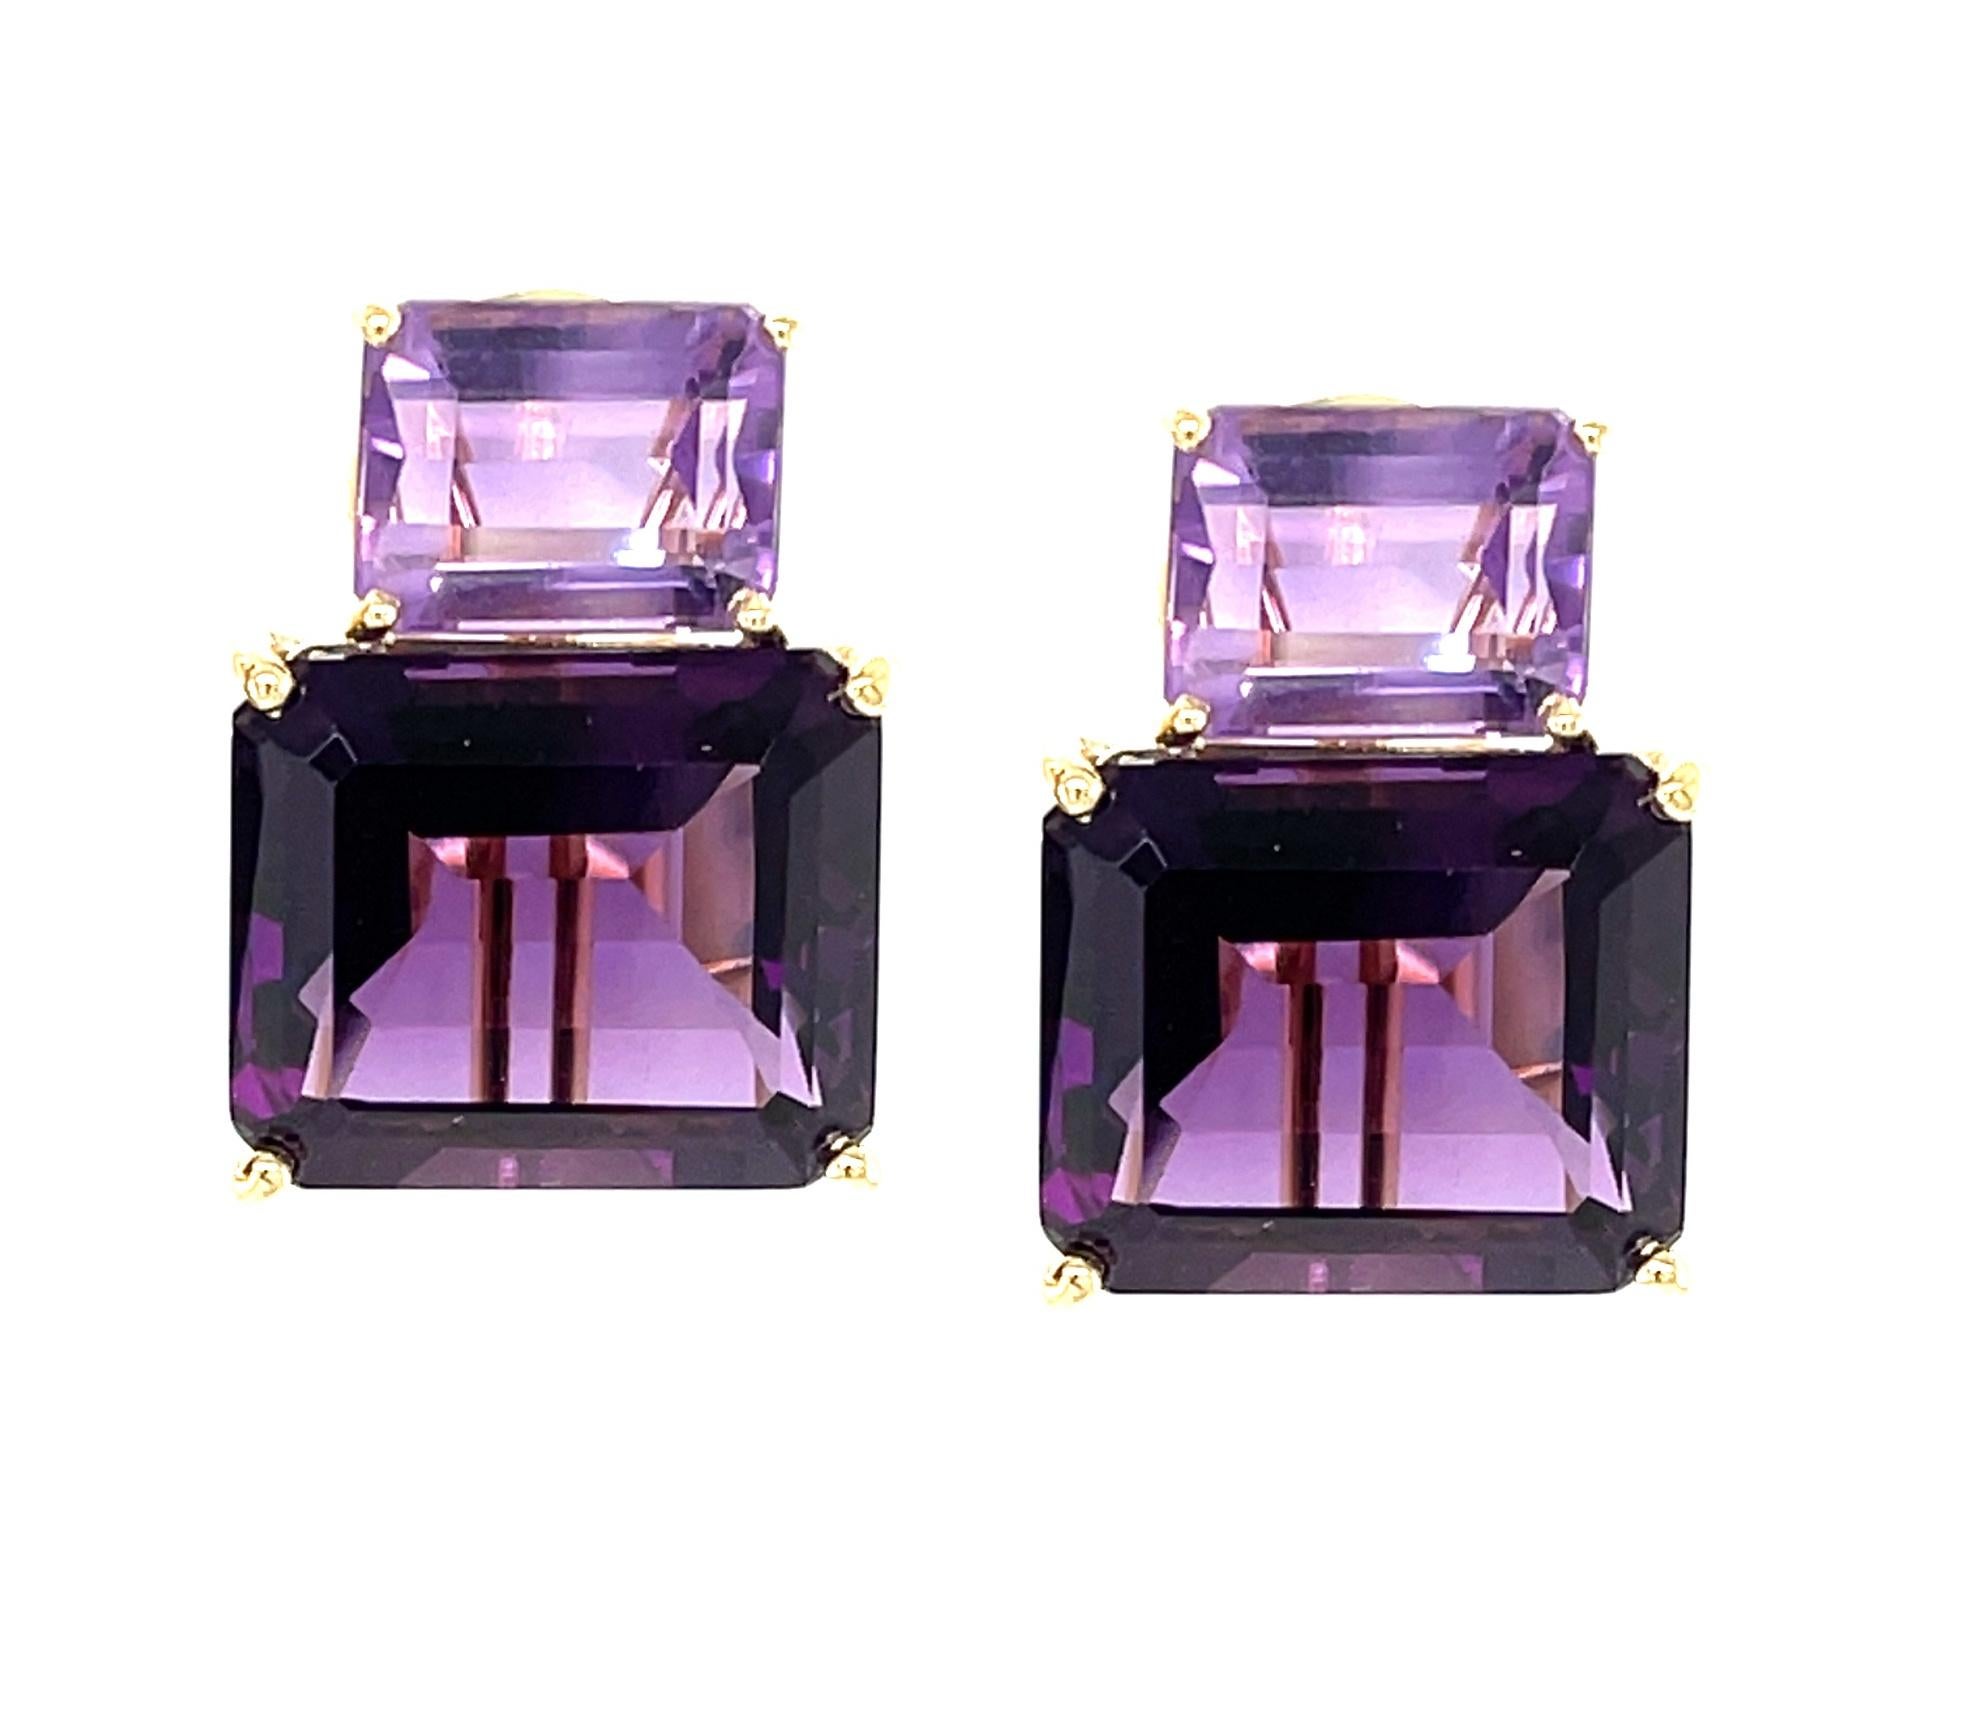 Royal purple amethyst is combined with delicate Rose de France amethyst in this gorgeous pair of earrings handcrafted in 18k yellow gold. We set beautiful, emerald-cut amethysts horizontally in our popular 